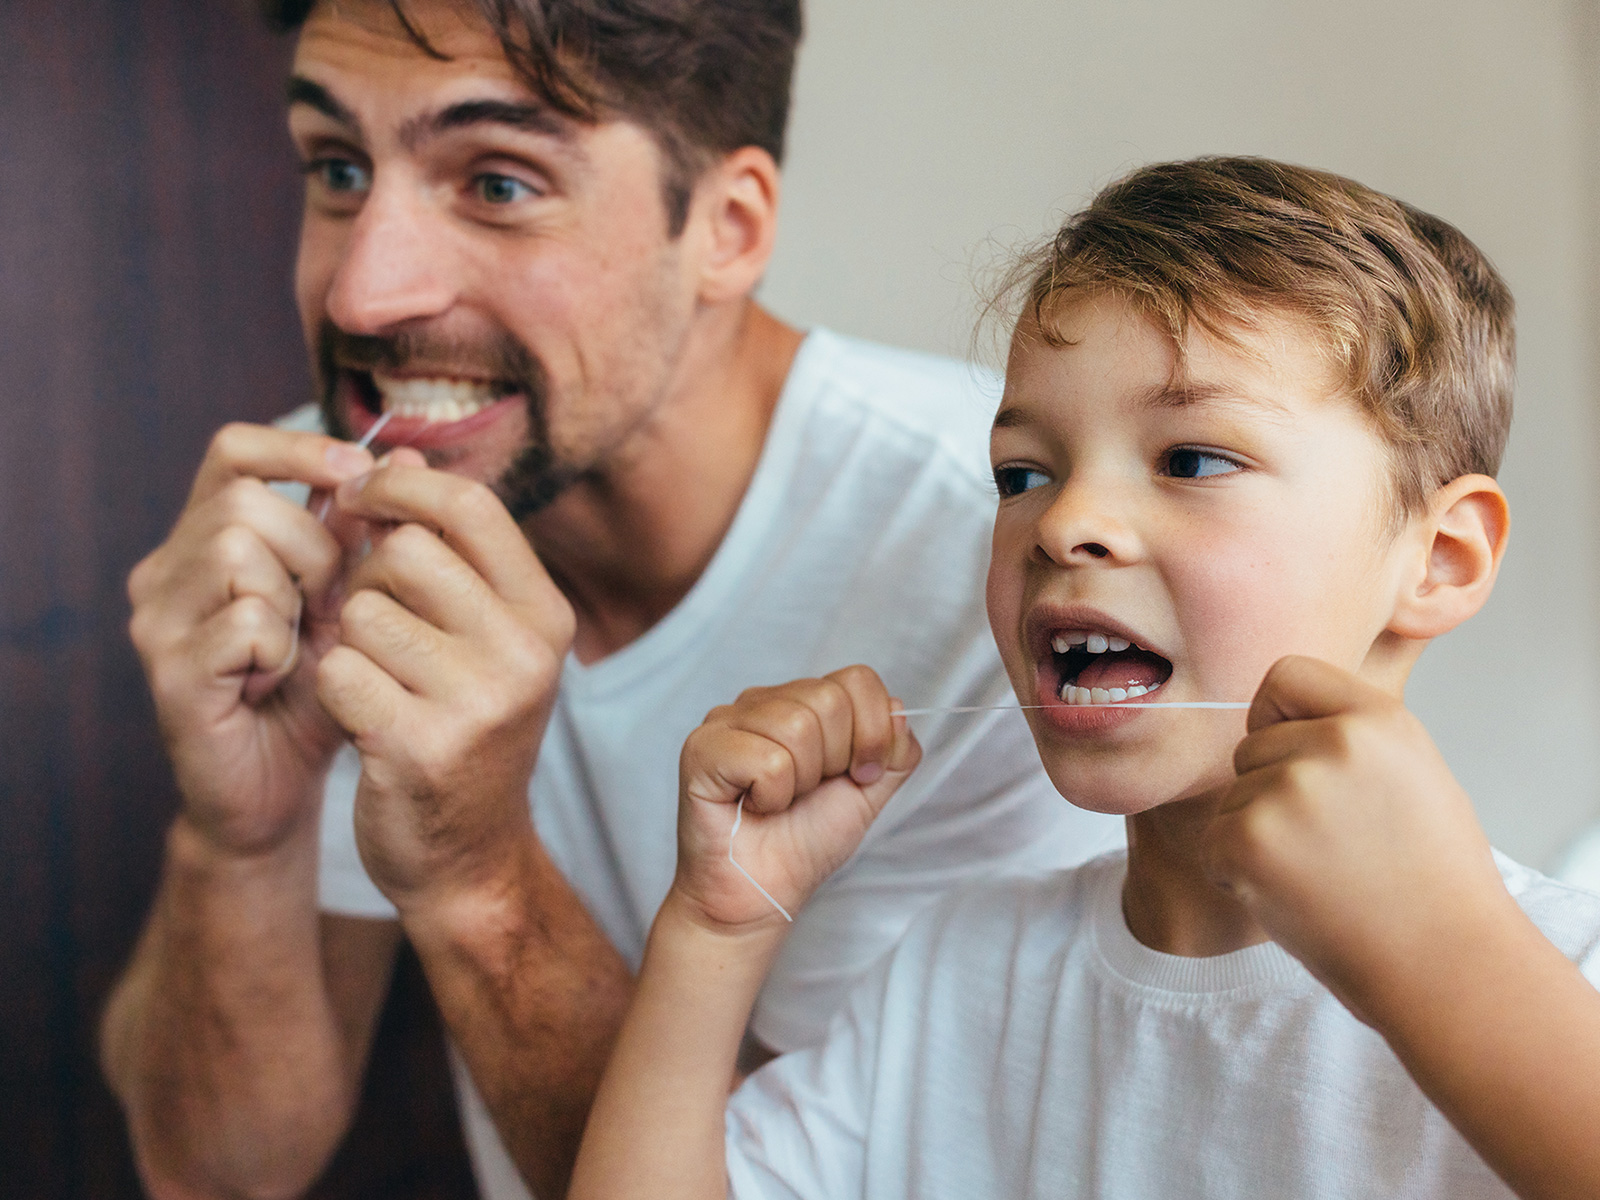 Father and son flossing their teeth together.